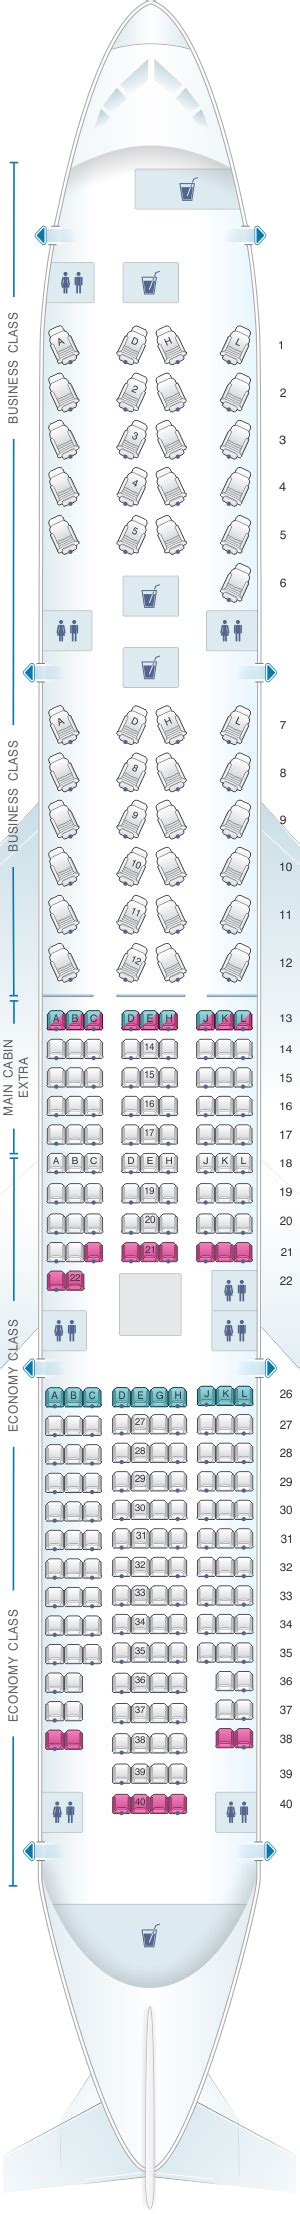 Seating Chart Boeing 777